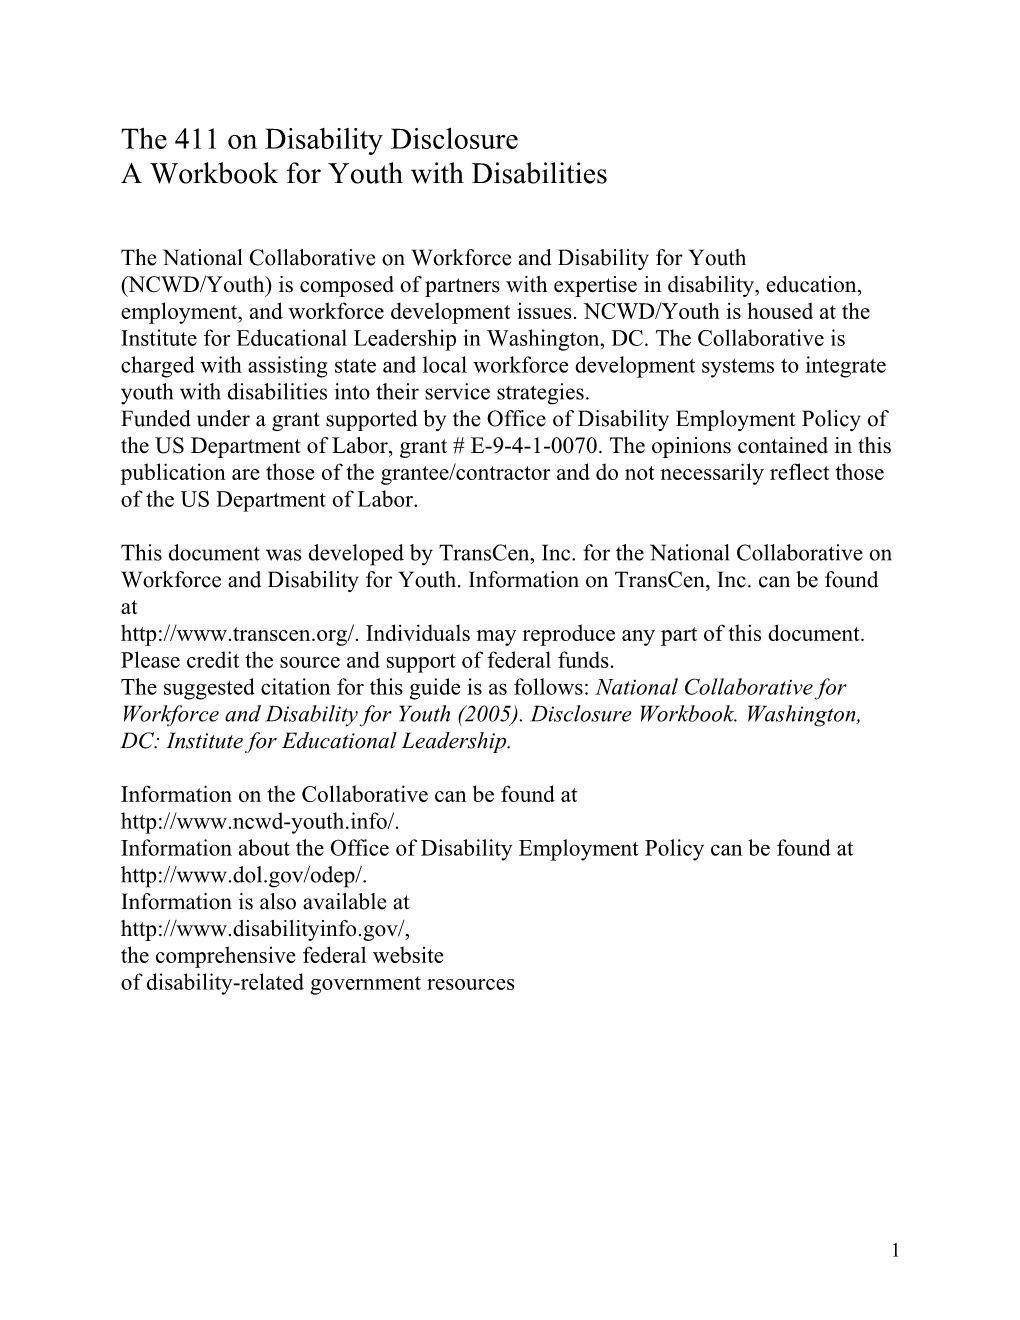 The 411 on Disability Disclosure